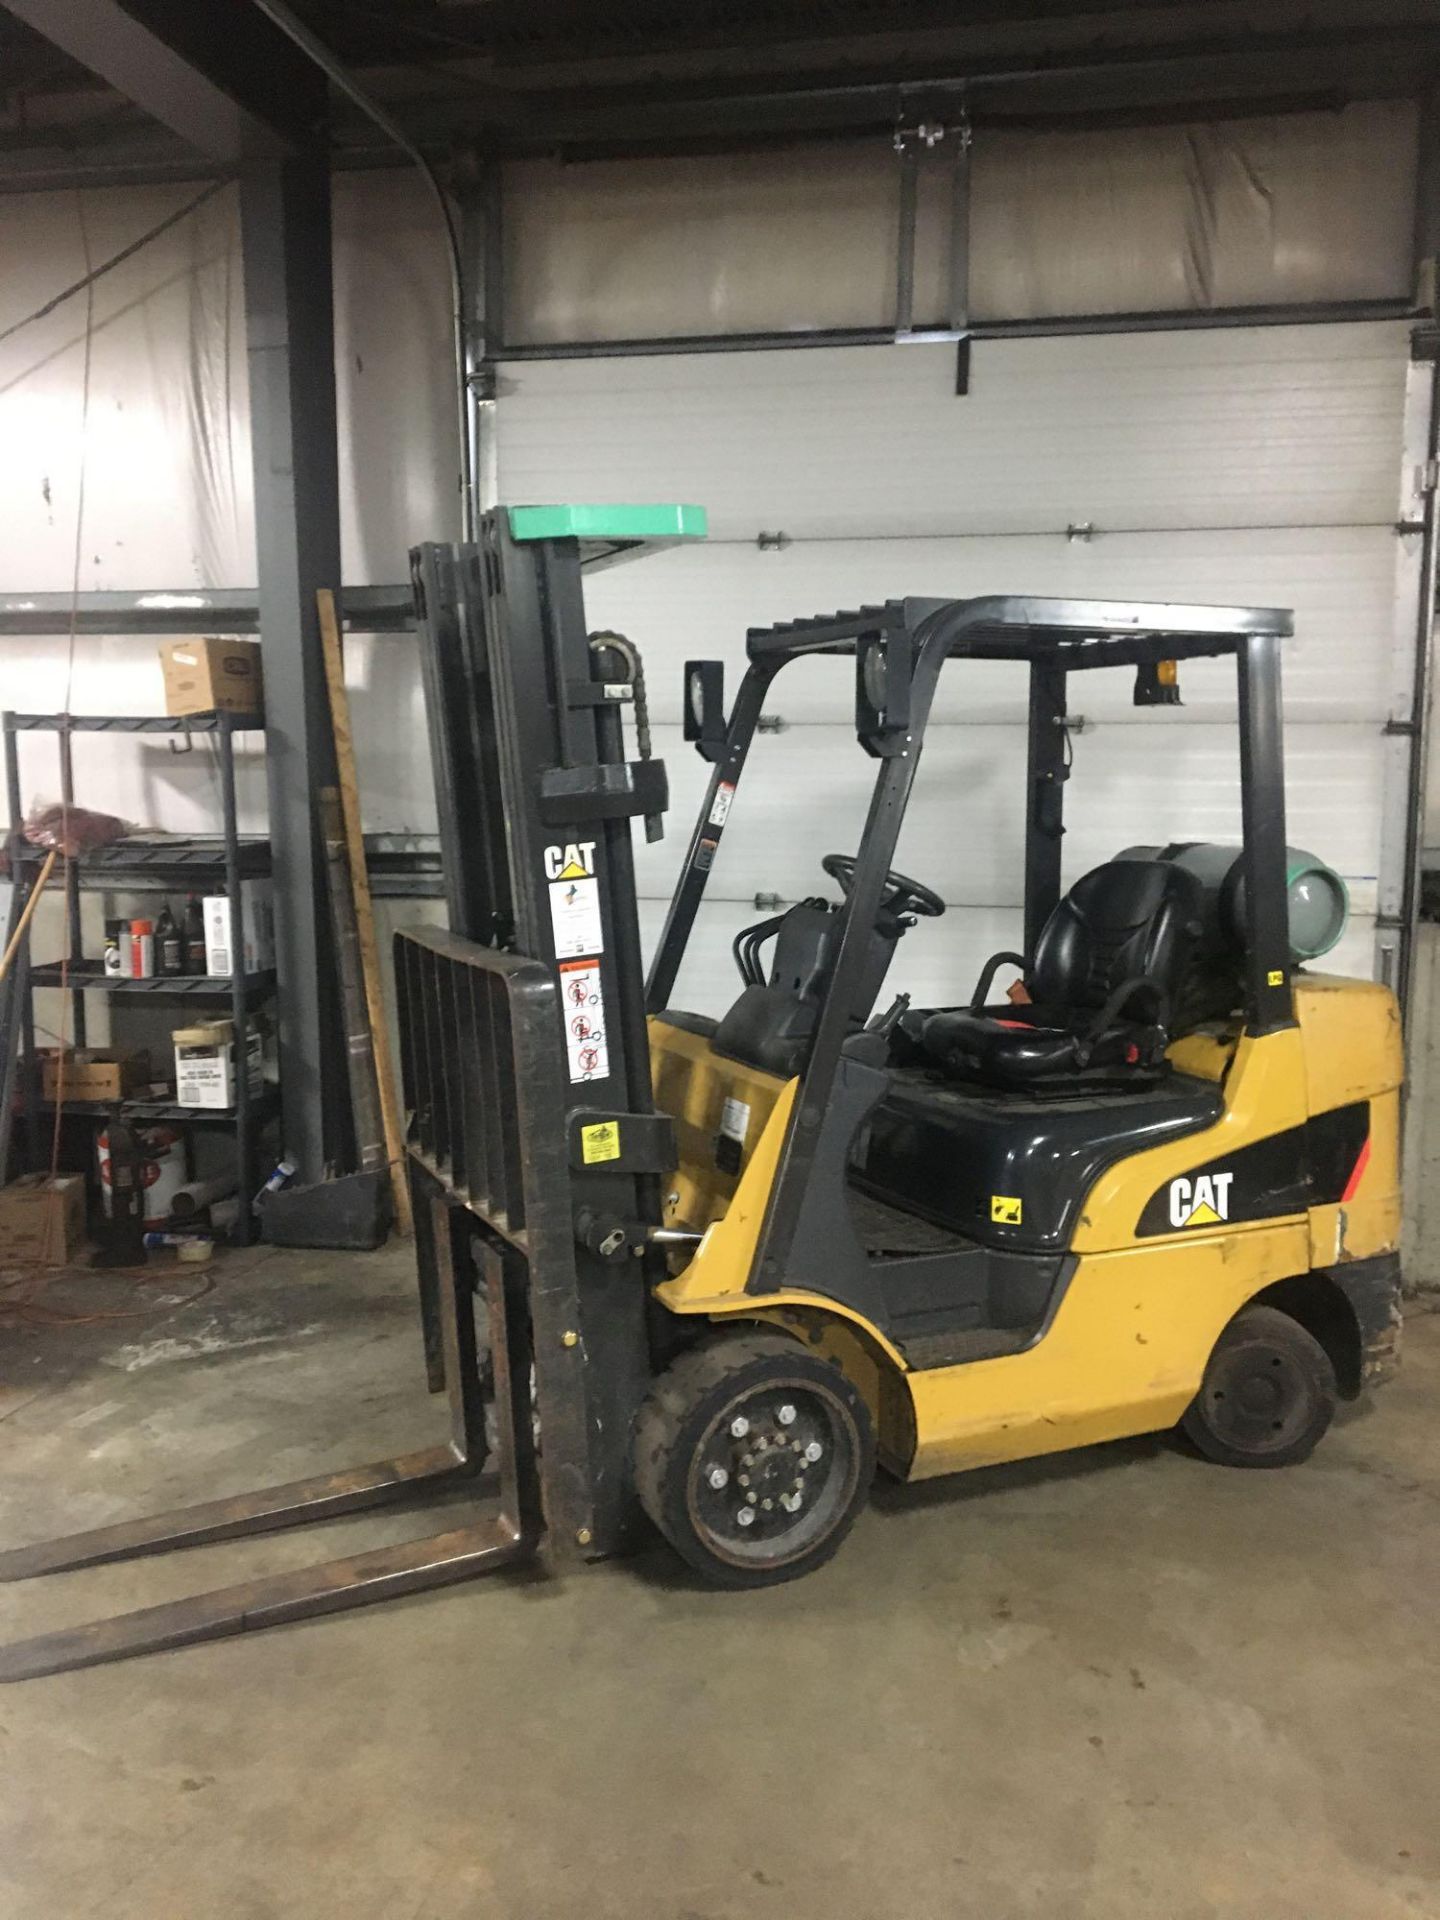 Propane Forklift, Caterpillar, 2C600, Max Ht 199", Max Cap 5150, Hrs 999 Started and Moved